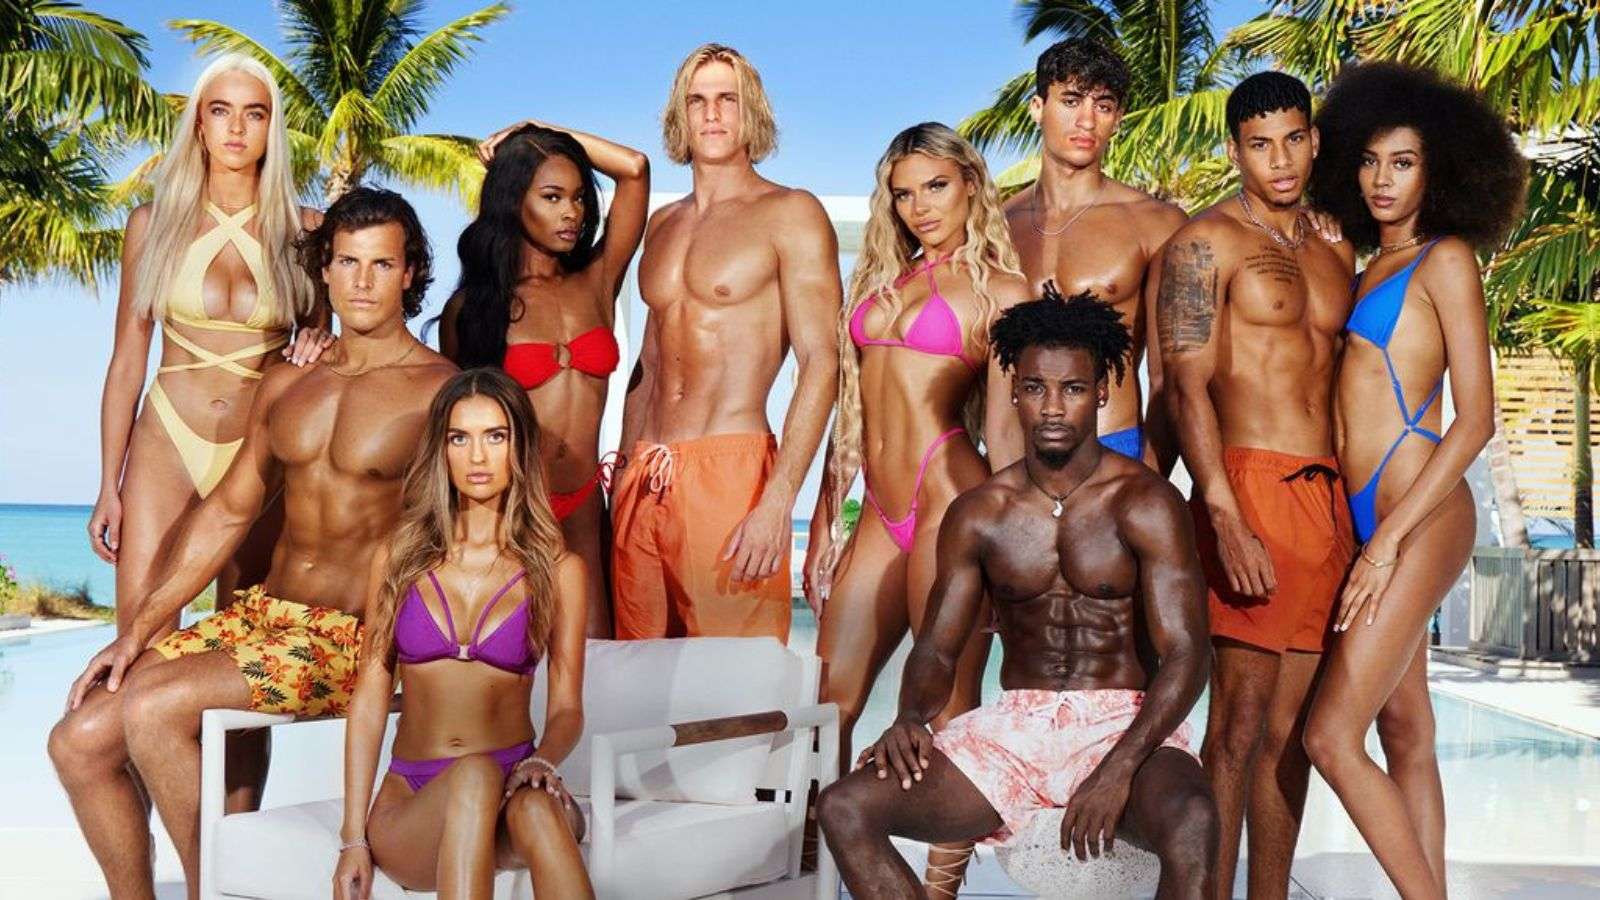 Season 5 cast of Too Hot To Handle